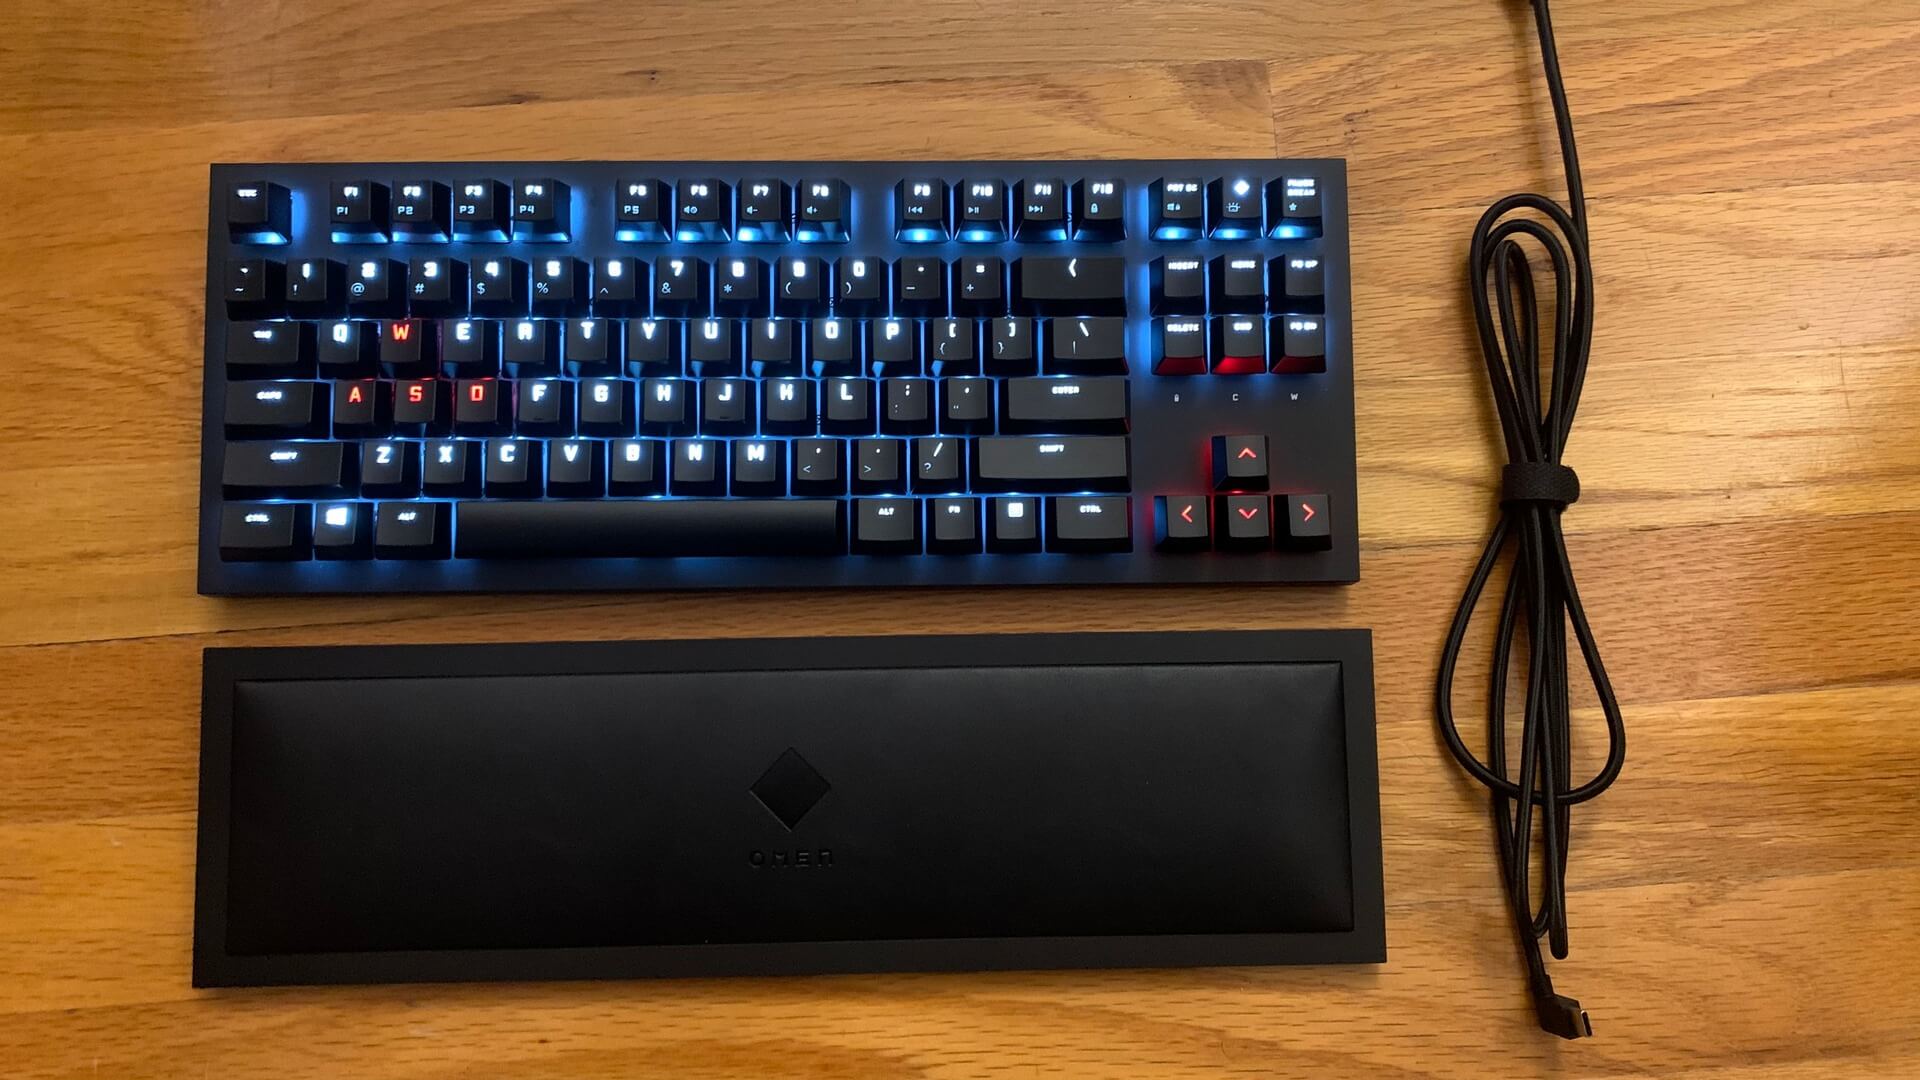 Omen Spacer Featured Image of keyboard and all accessories